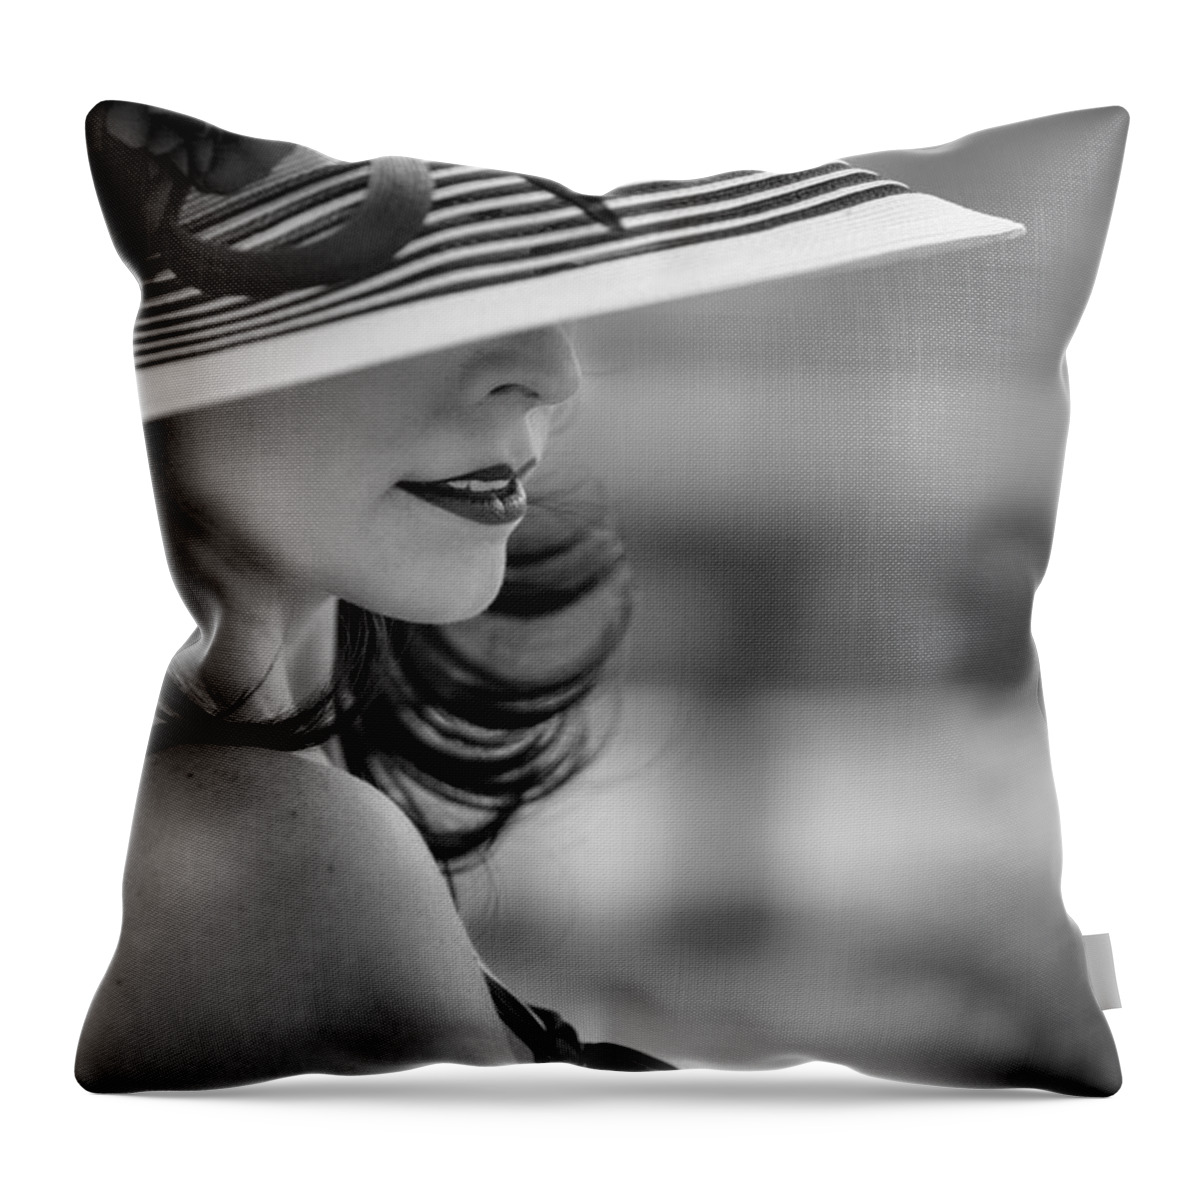 Profile Throw Pillow featuring the photograph Profile by Linda Blair